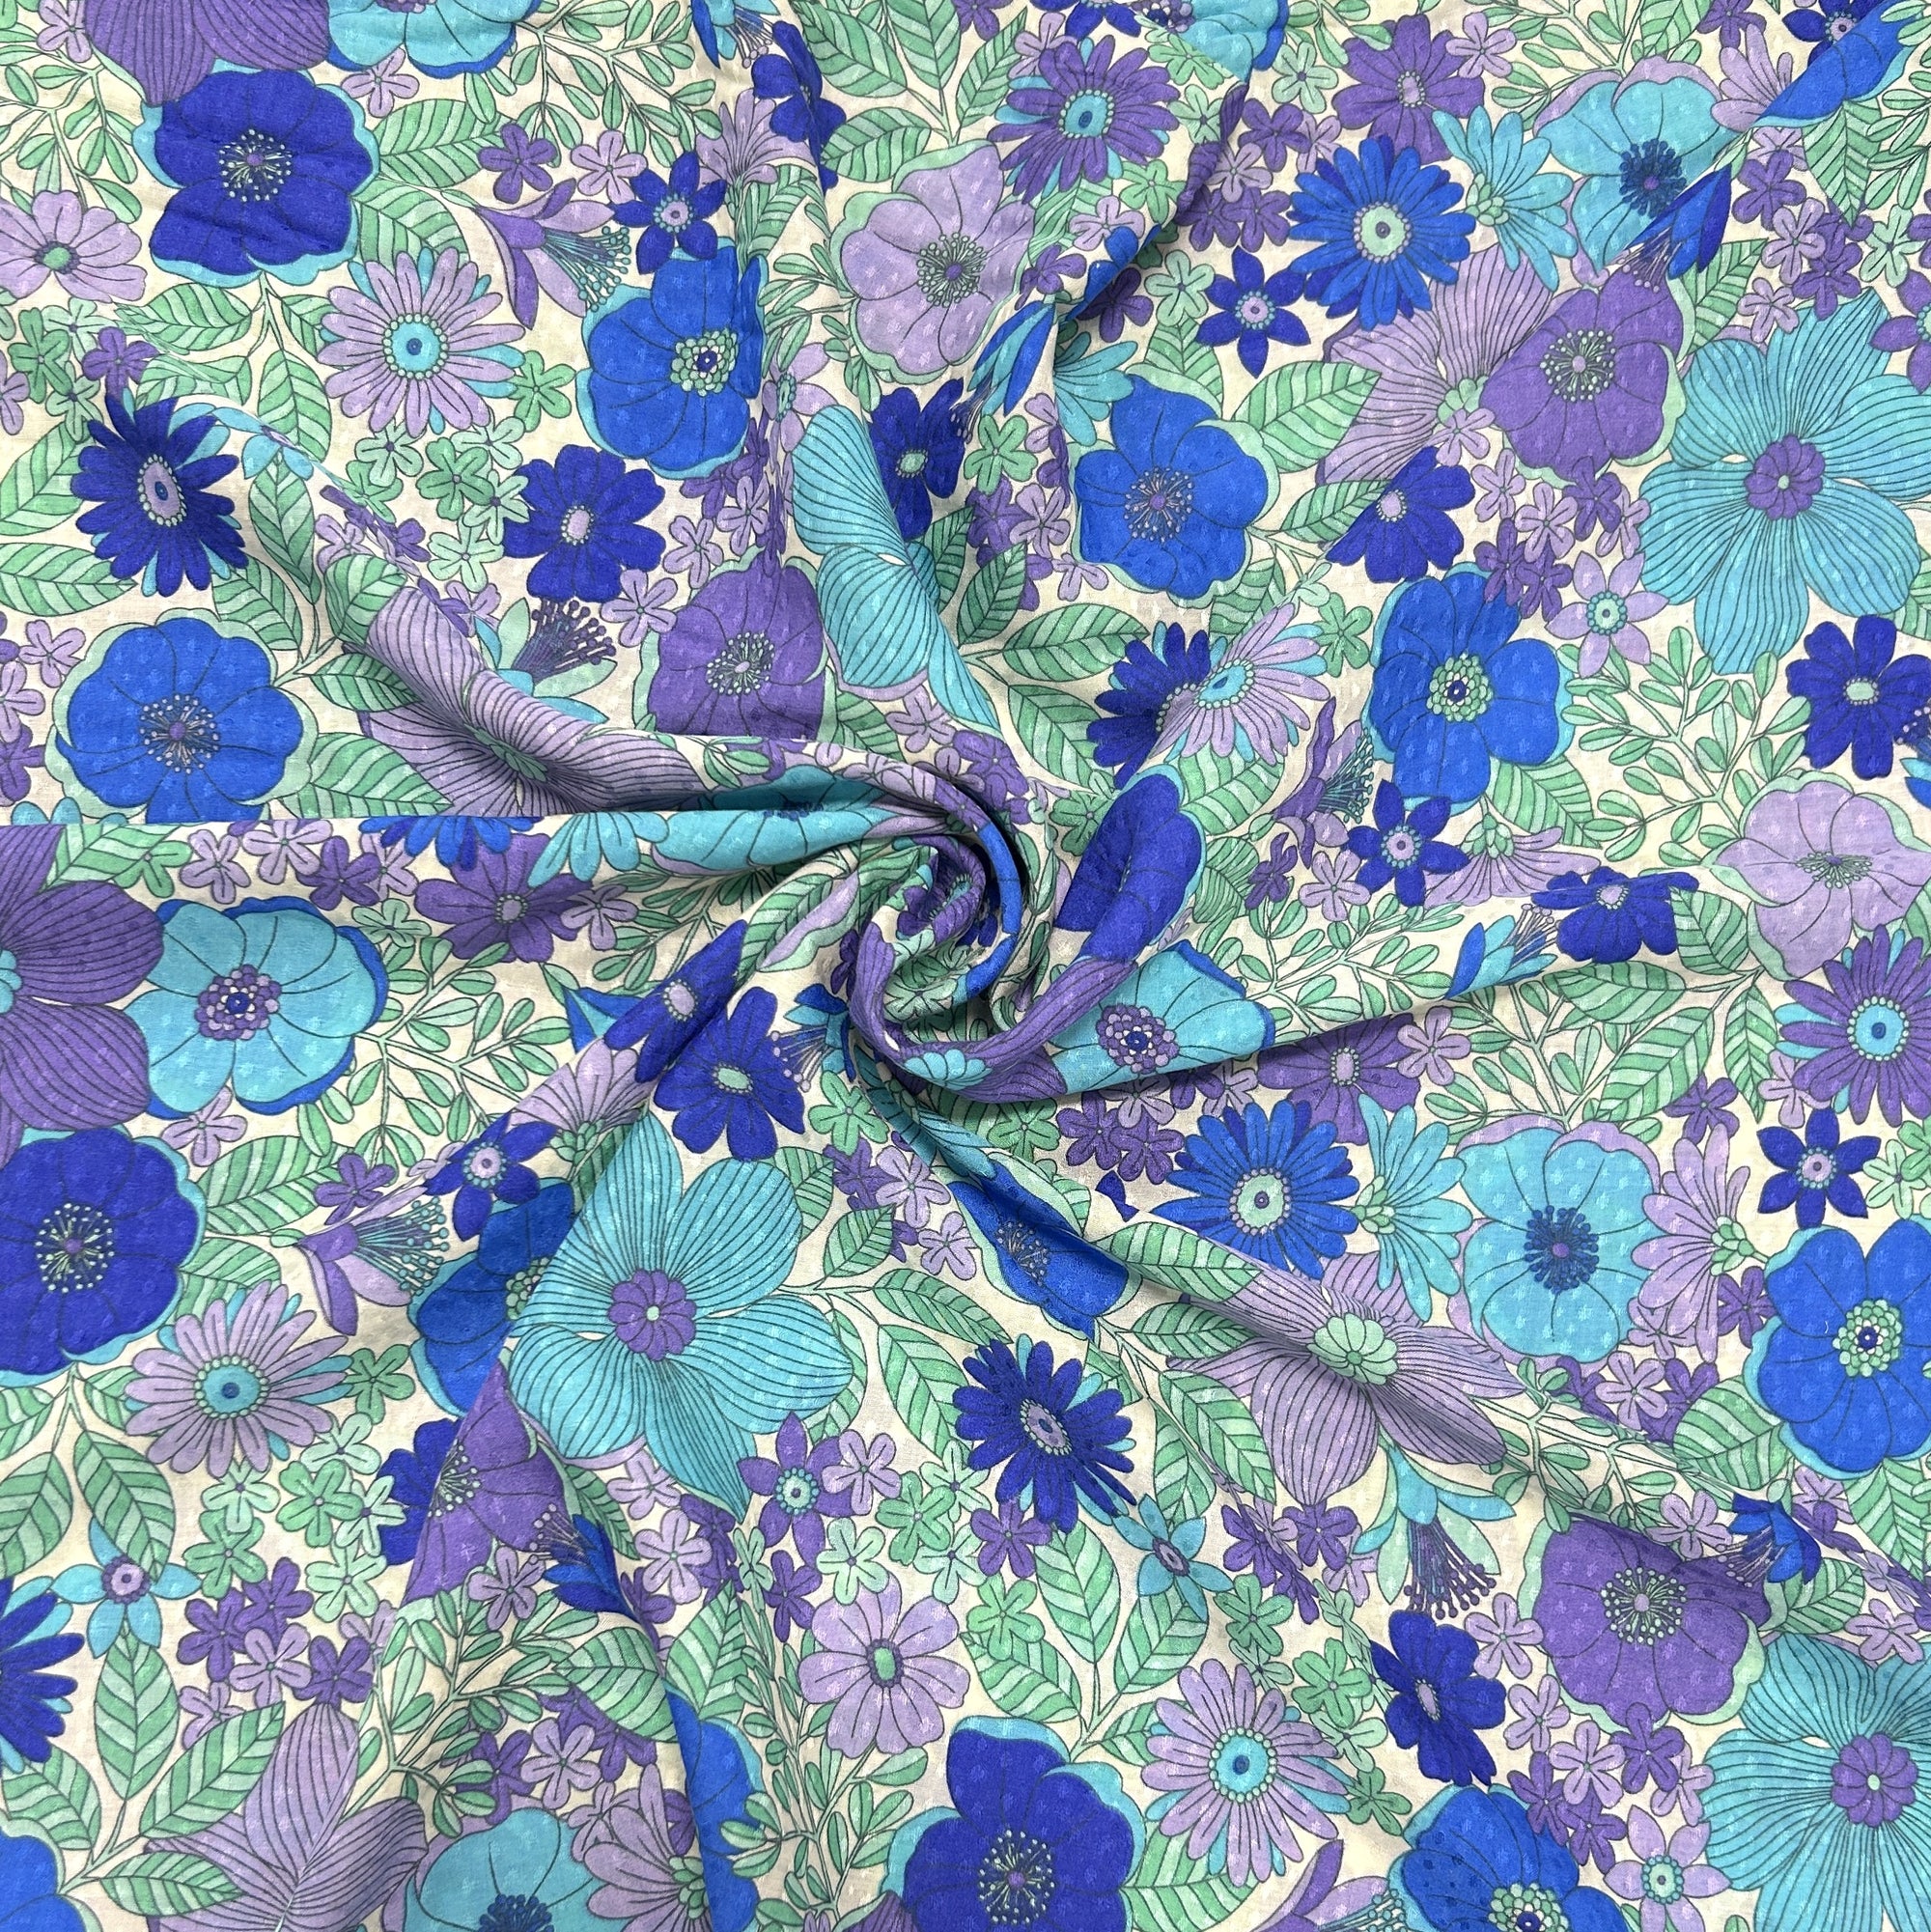 Purple Royal Blue Mint and Off White Retro Floral Rayon Lawn Jacquard